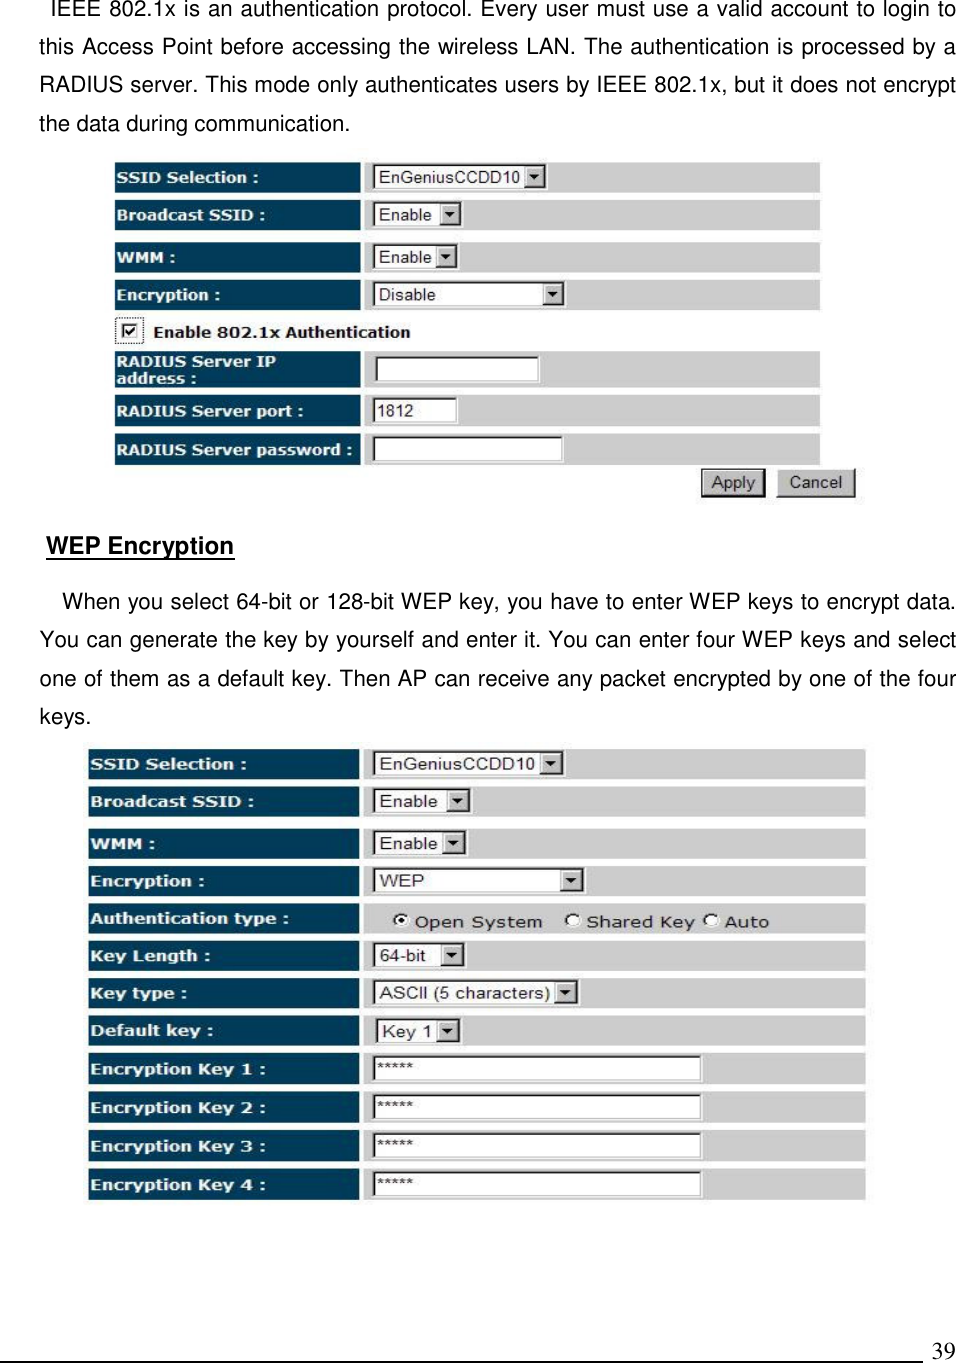   39 IEEE 802.1x is an authentication protocol. Every user must use a valid account to login to this Access Point before accessing the wireless LAN. The authentication is processed by a RADIUS server. This mode only authenticates users by IEEE 802.1x, but it does not encrypt the data during communication.   WEP Encryption  When you select 64-bit or 128-bit WEP key, you have to enter WEP keys to encrypt data. You can generate the key by yourself and enter it. You can enter four WEP keys and select one of them as a default key. Then AP can receive any packet encrypted by one of the four keys.   